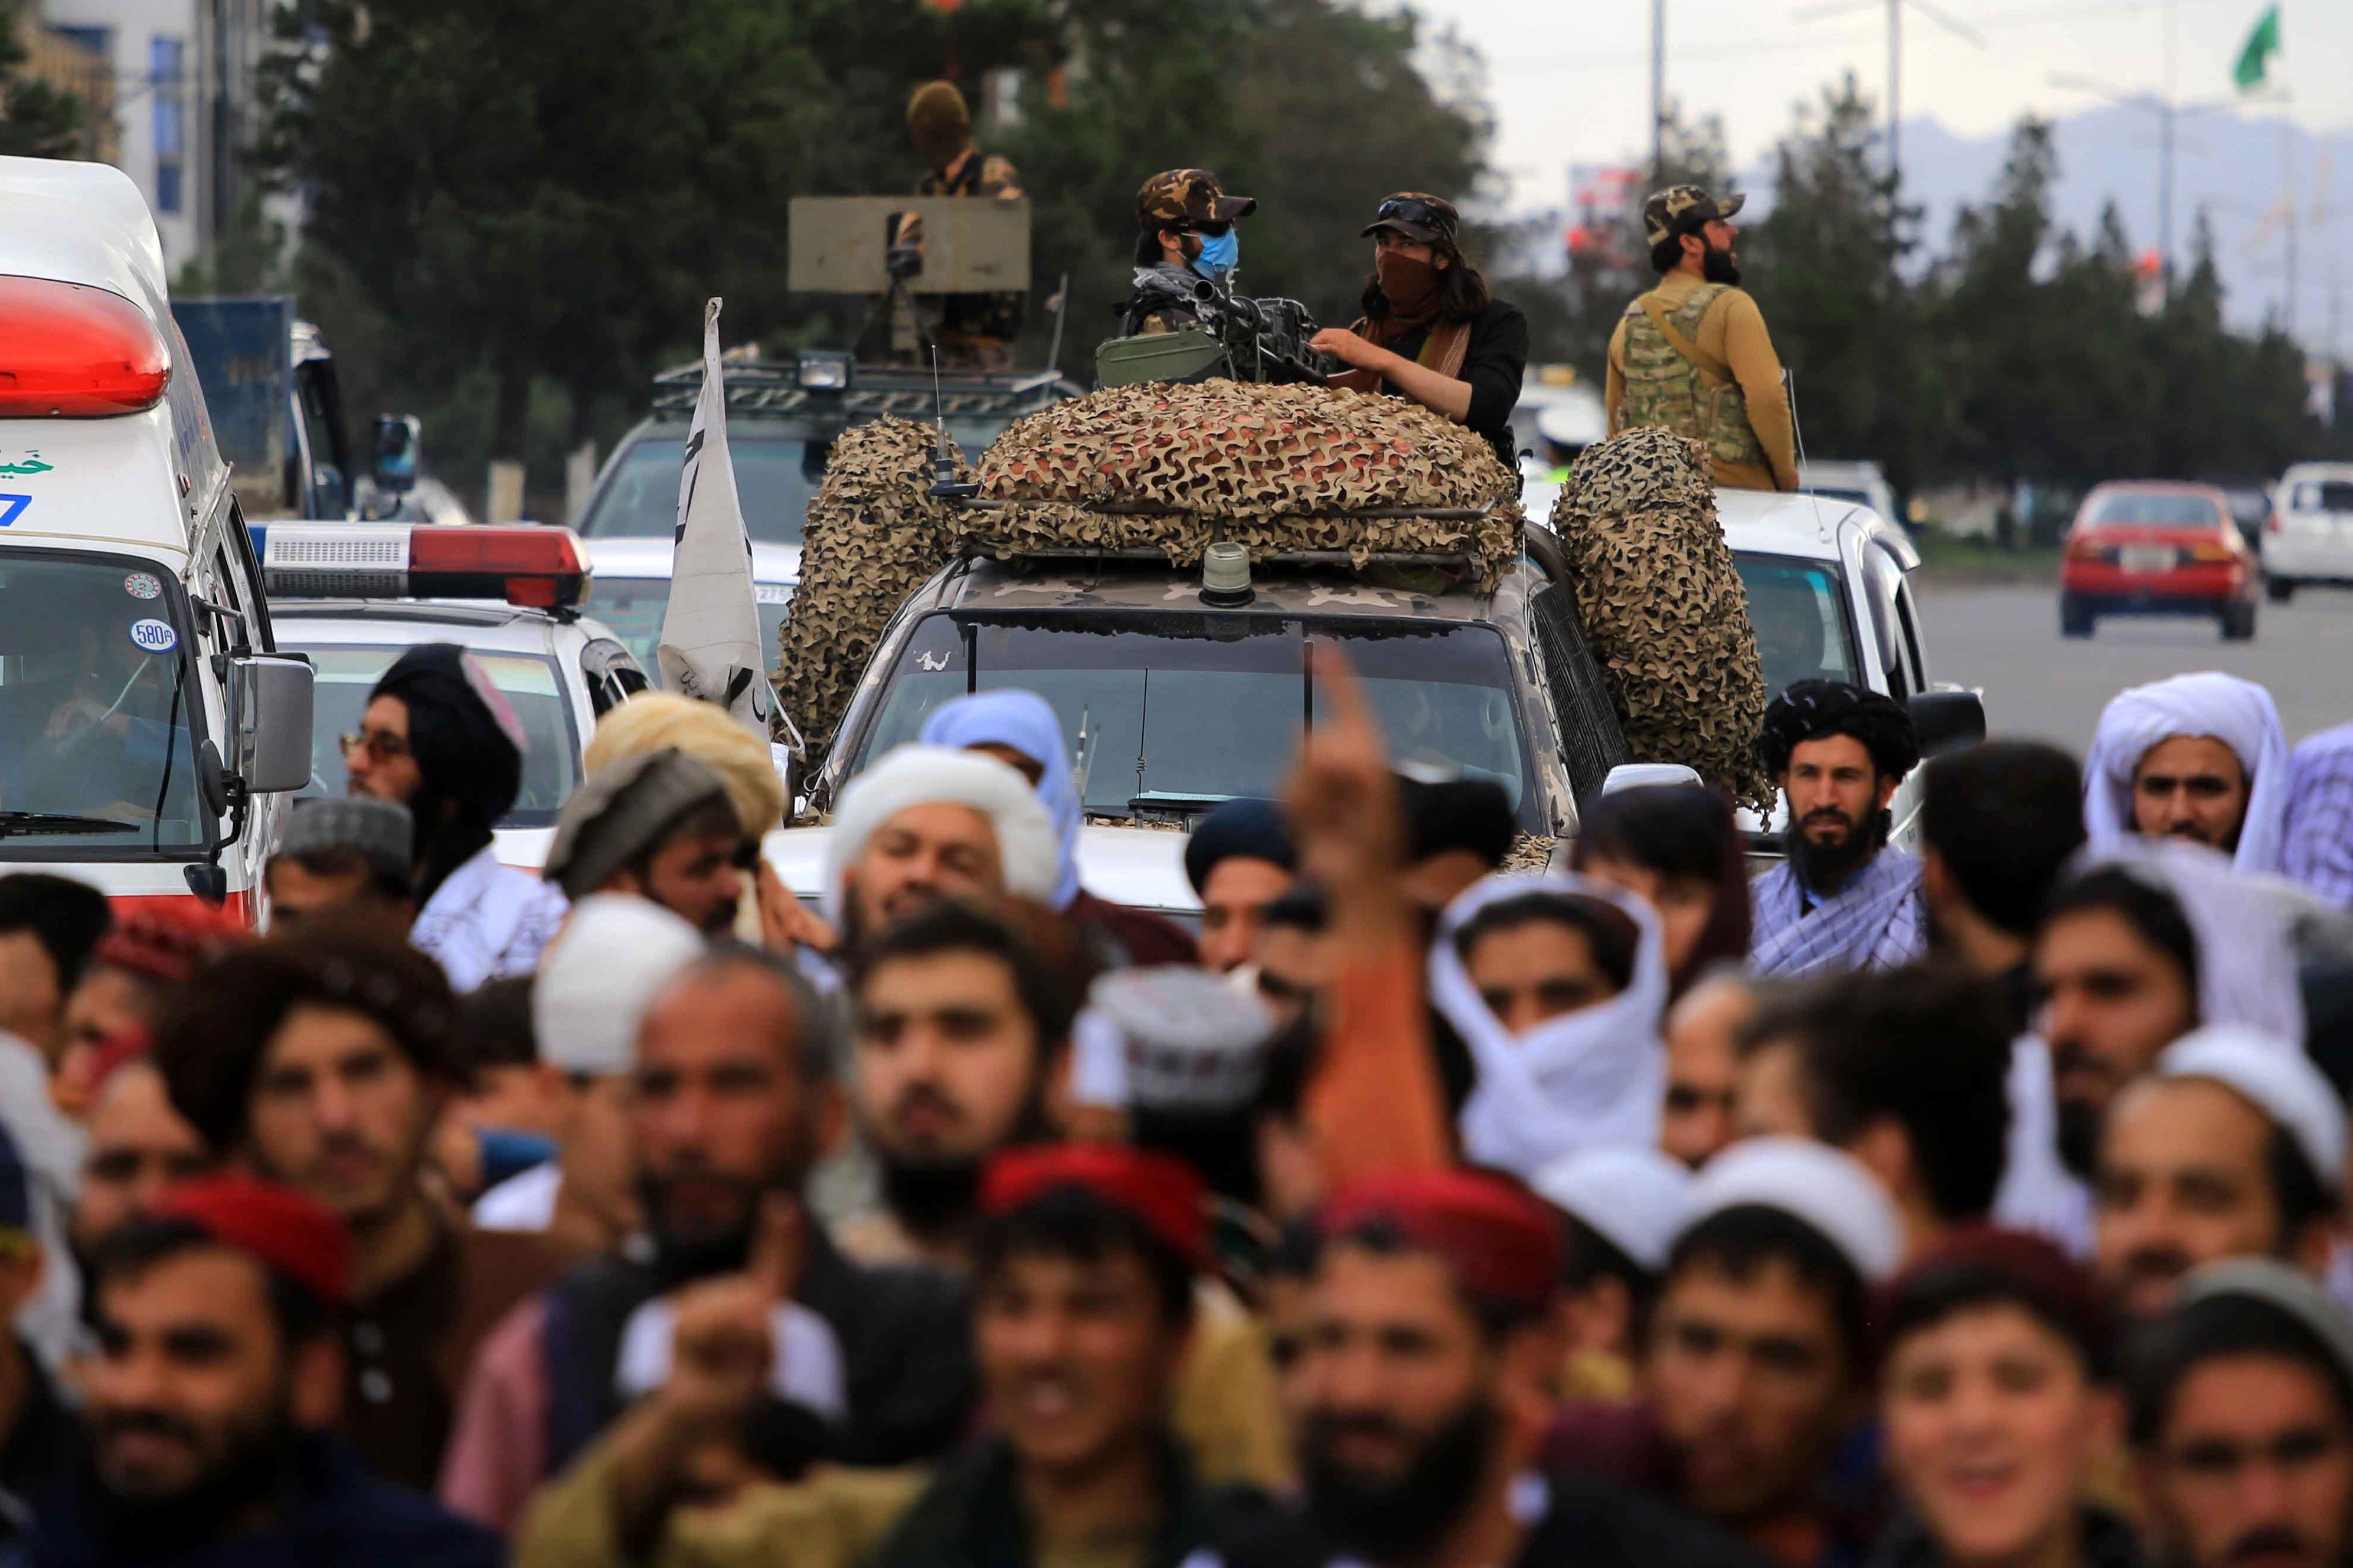 Taliban security forces stand guard during a protest in Kabul, Afghanistan, on August 5 against a US drone strike that killed the al-Qaeda leader Ayman al-Zawahiri. Photo: EPA-EFE